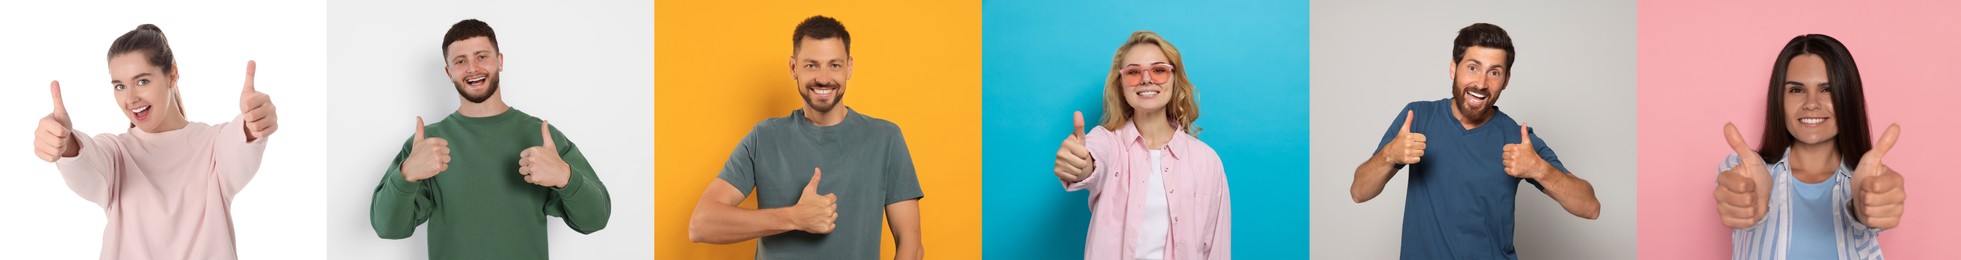 Collage with photos of people showing thumbs up on different color backgrounds